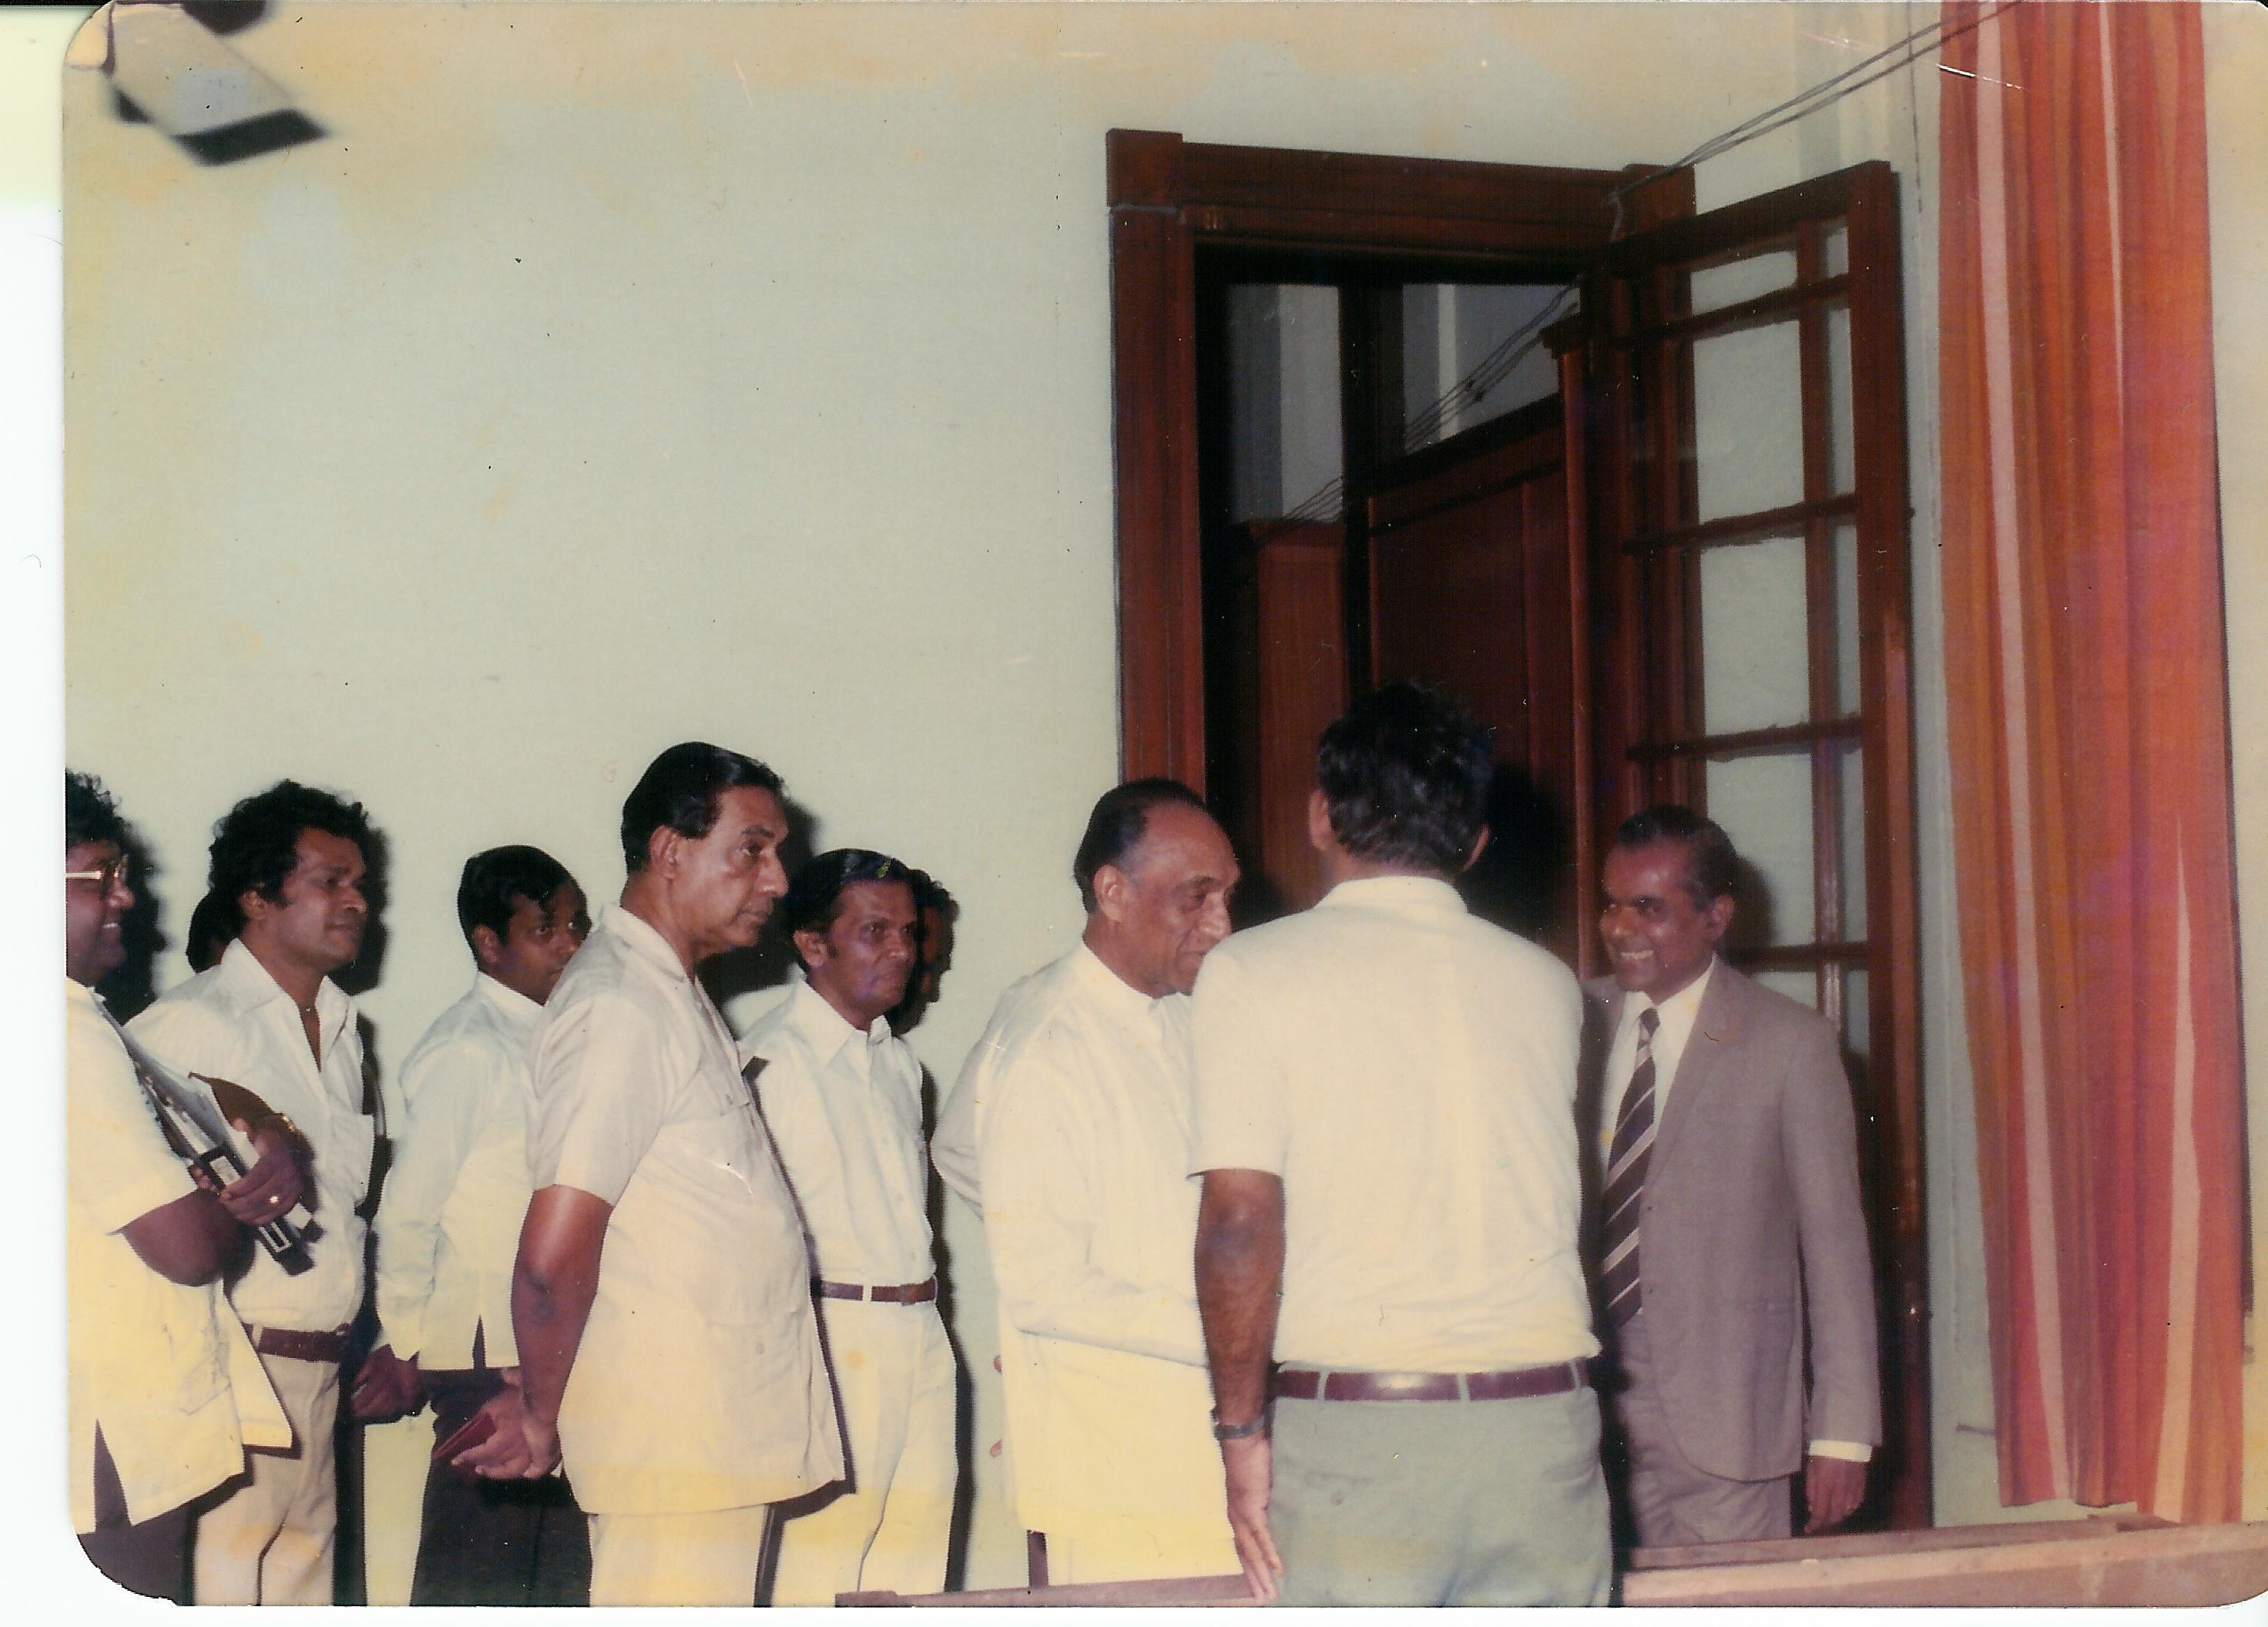 Visit of Prime Minister J.R. Jayawardana to the Election Office before the announcement of the final result. In the picture are Mr. H. W. Jayawardena, Prof. V. K. Samaranayake and Mr. Chandrananda de Silva, Commissioner of Elections.